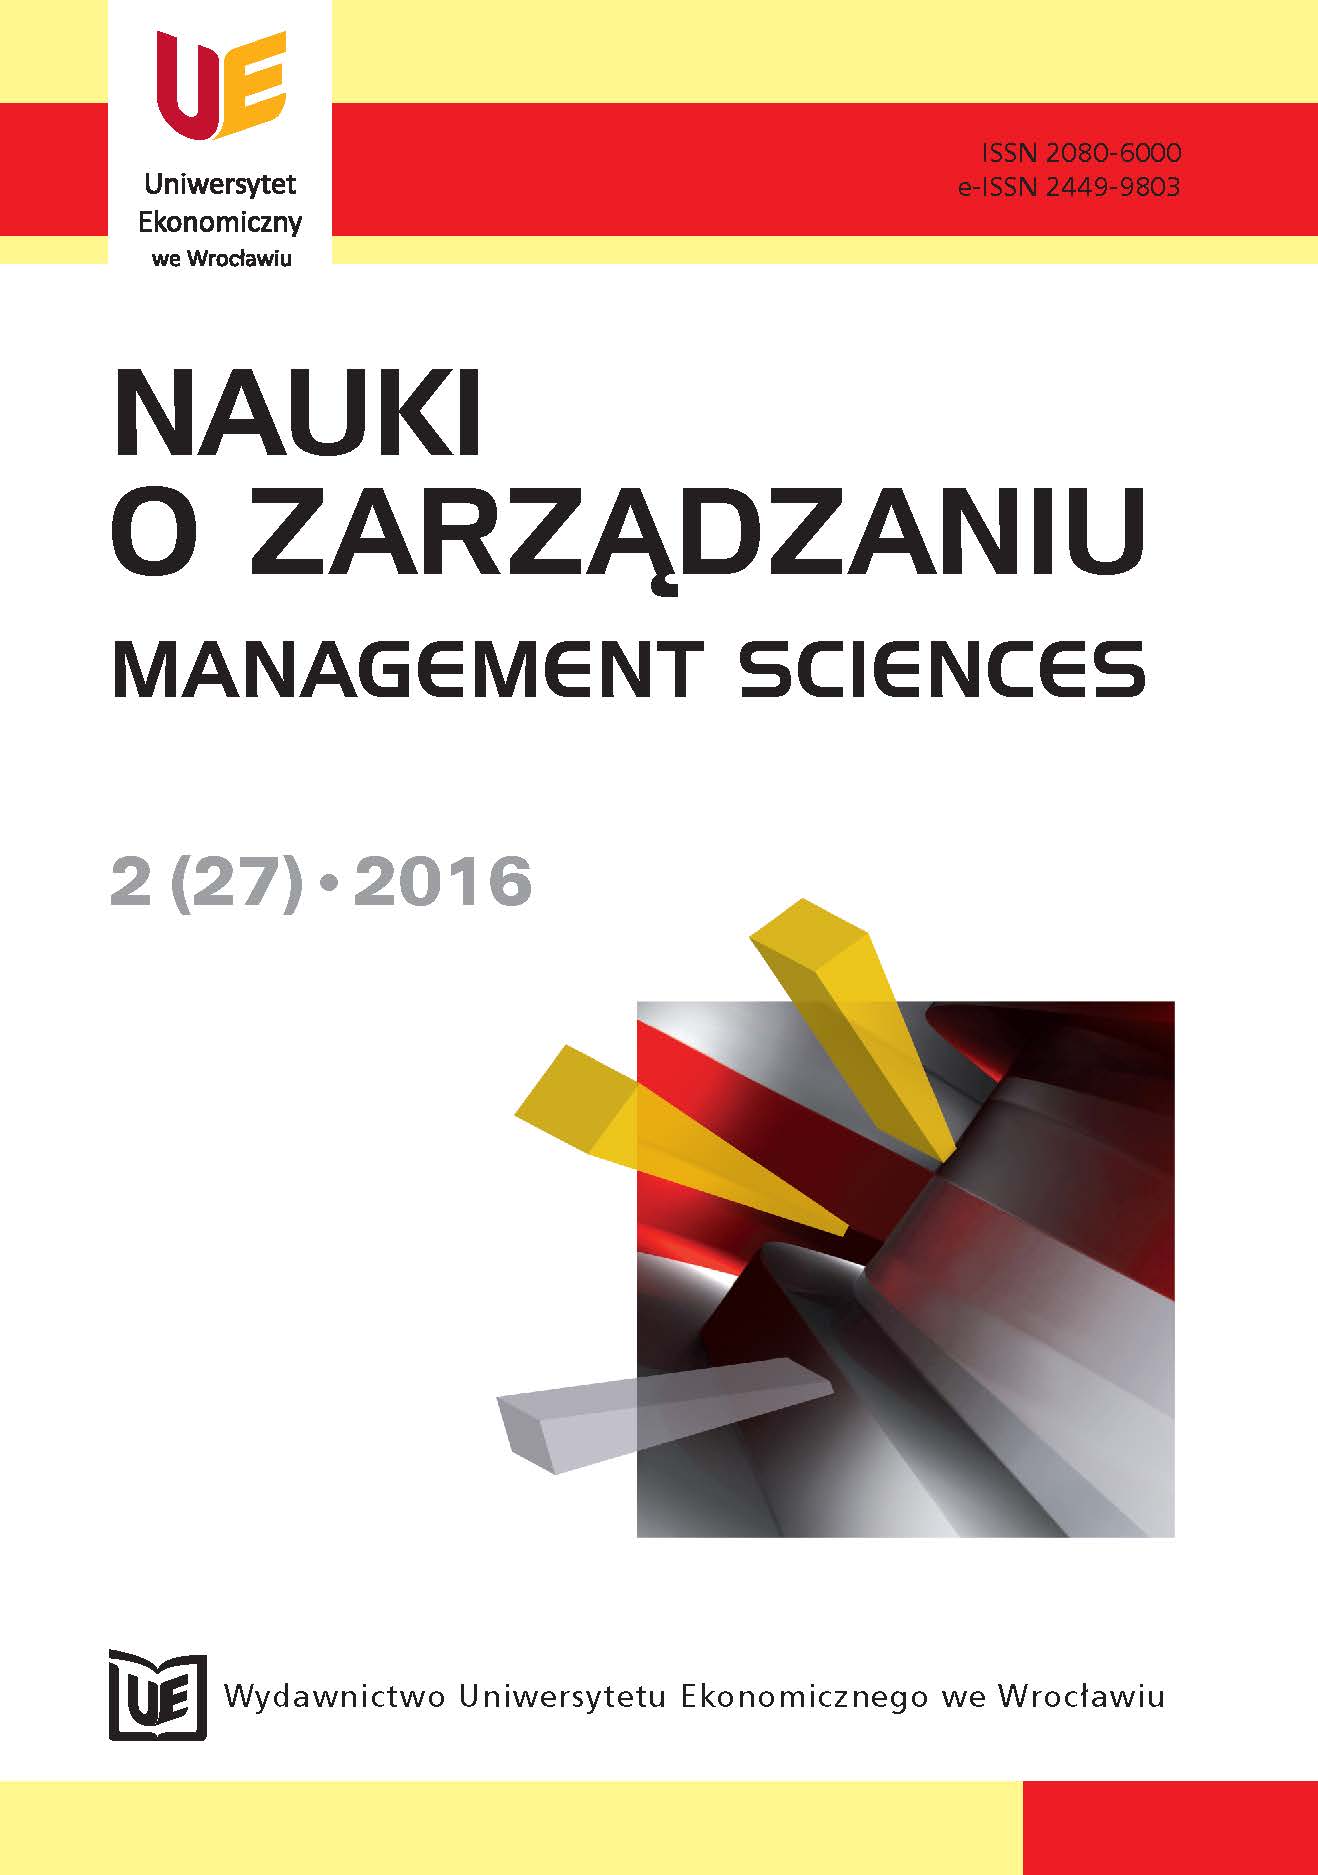 Paradoxes in the management of human capital in managers’ appraisal Cover Image